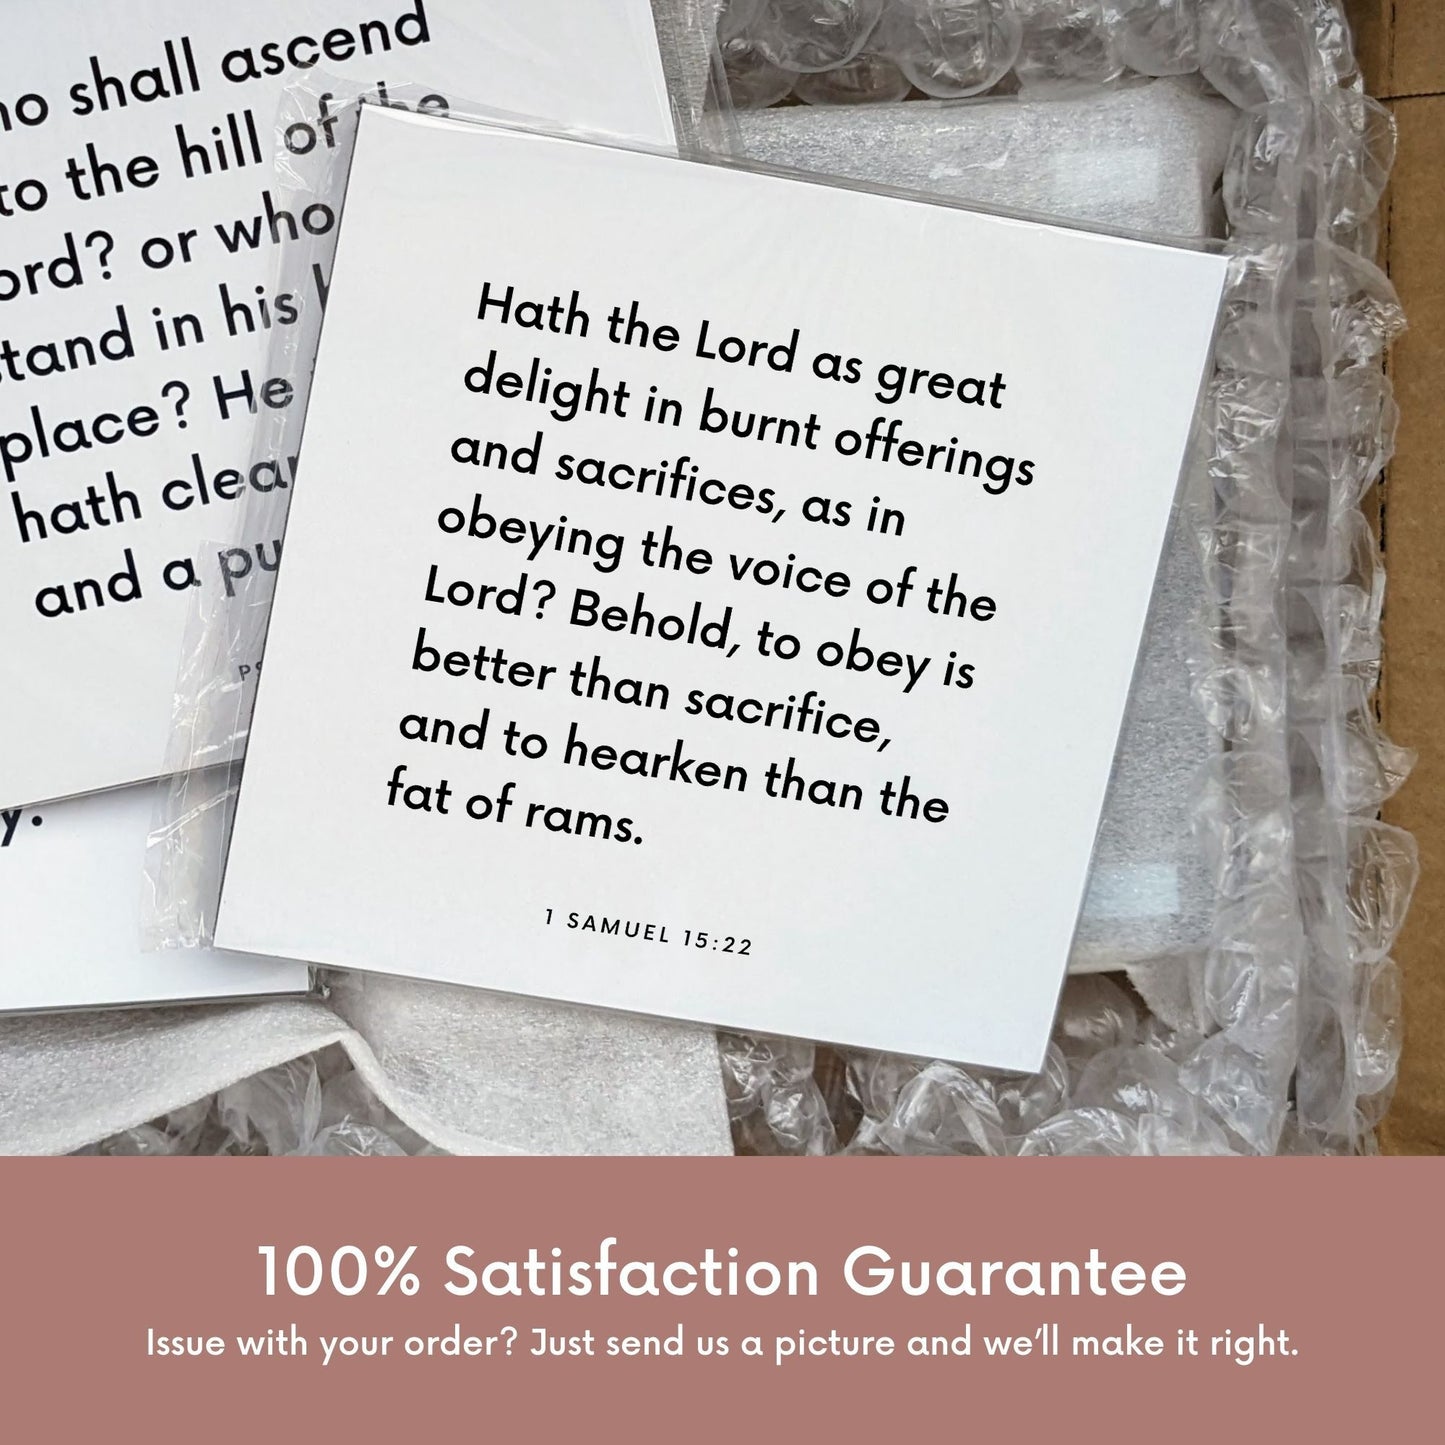 Shipping materials for scripture tile of 1 Samuel 15:22 - "To obey is better than sacrifice"